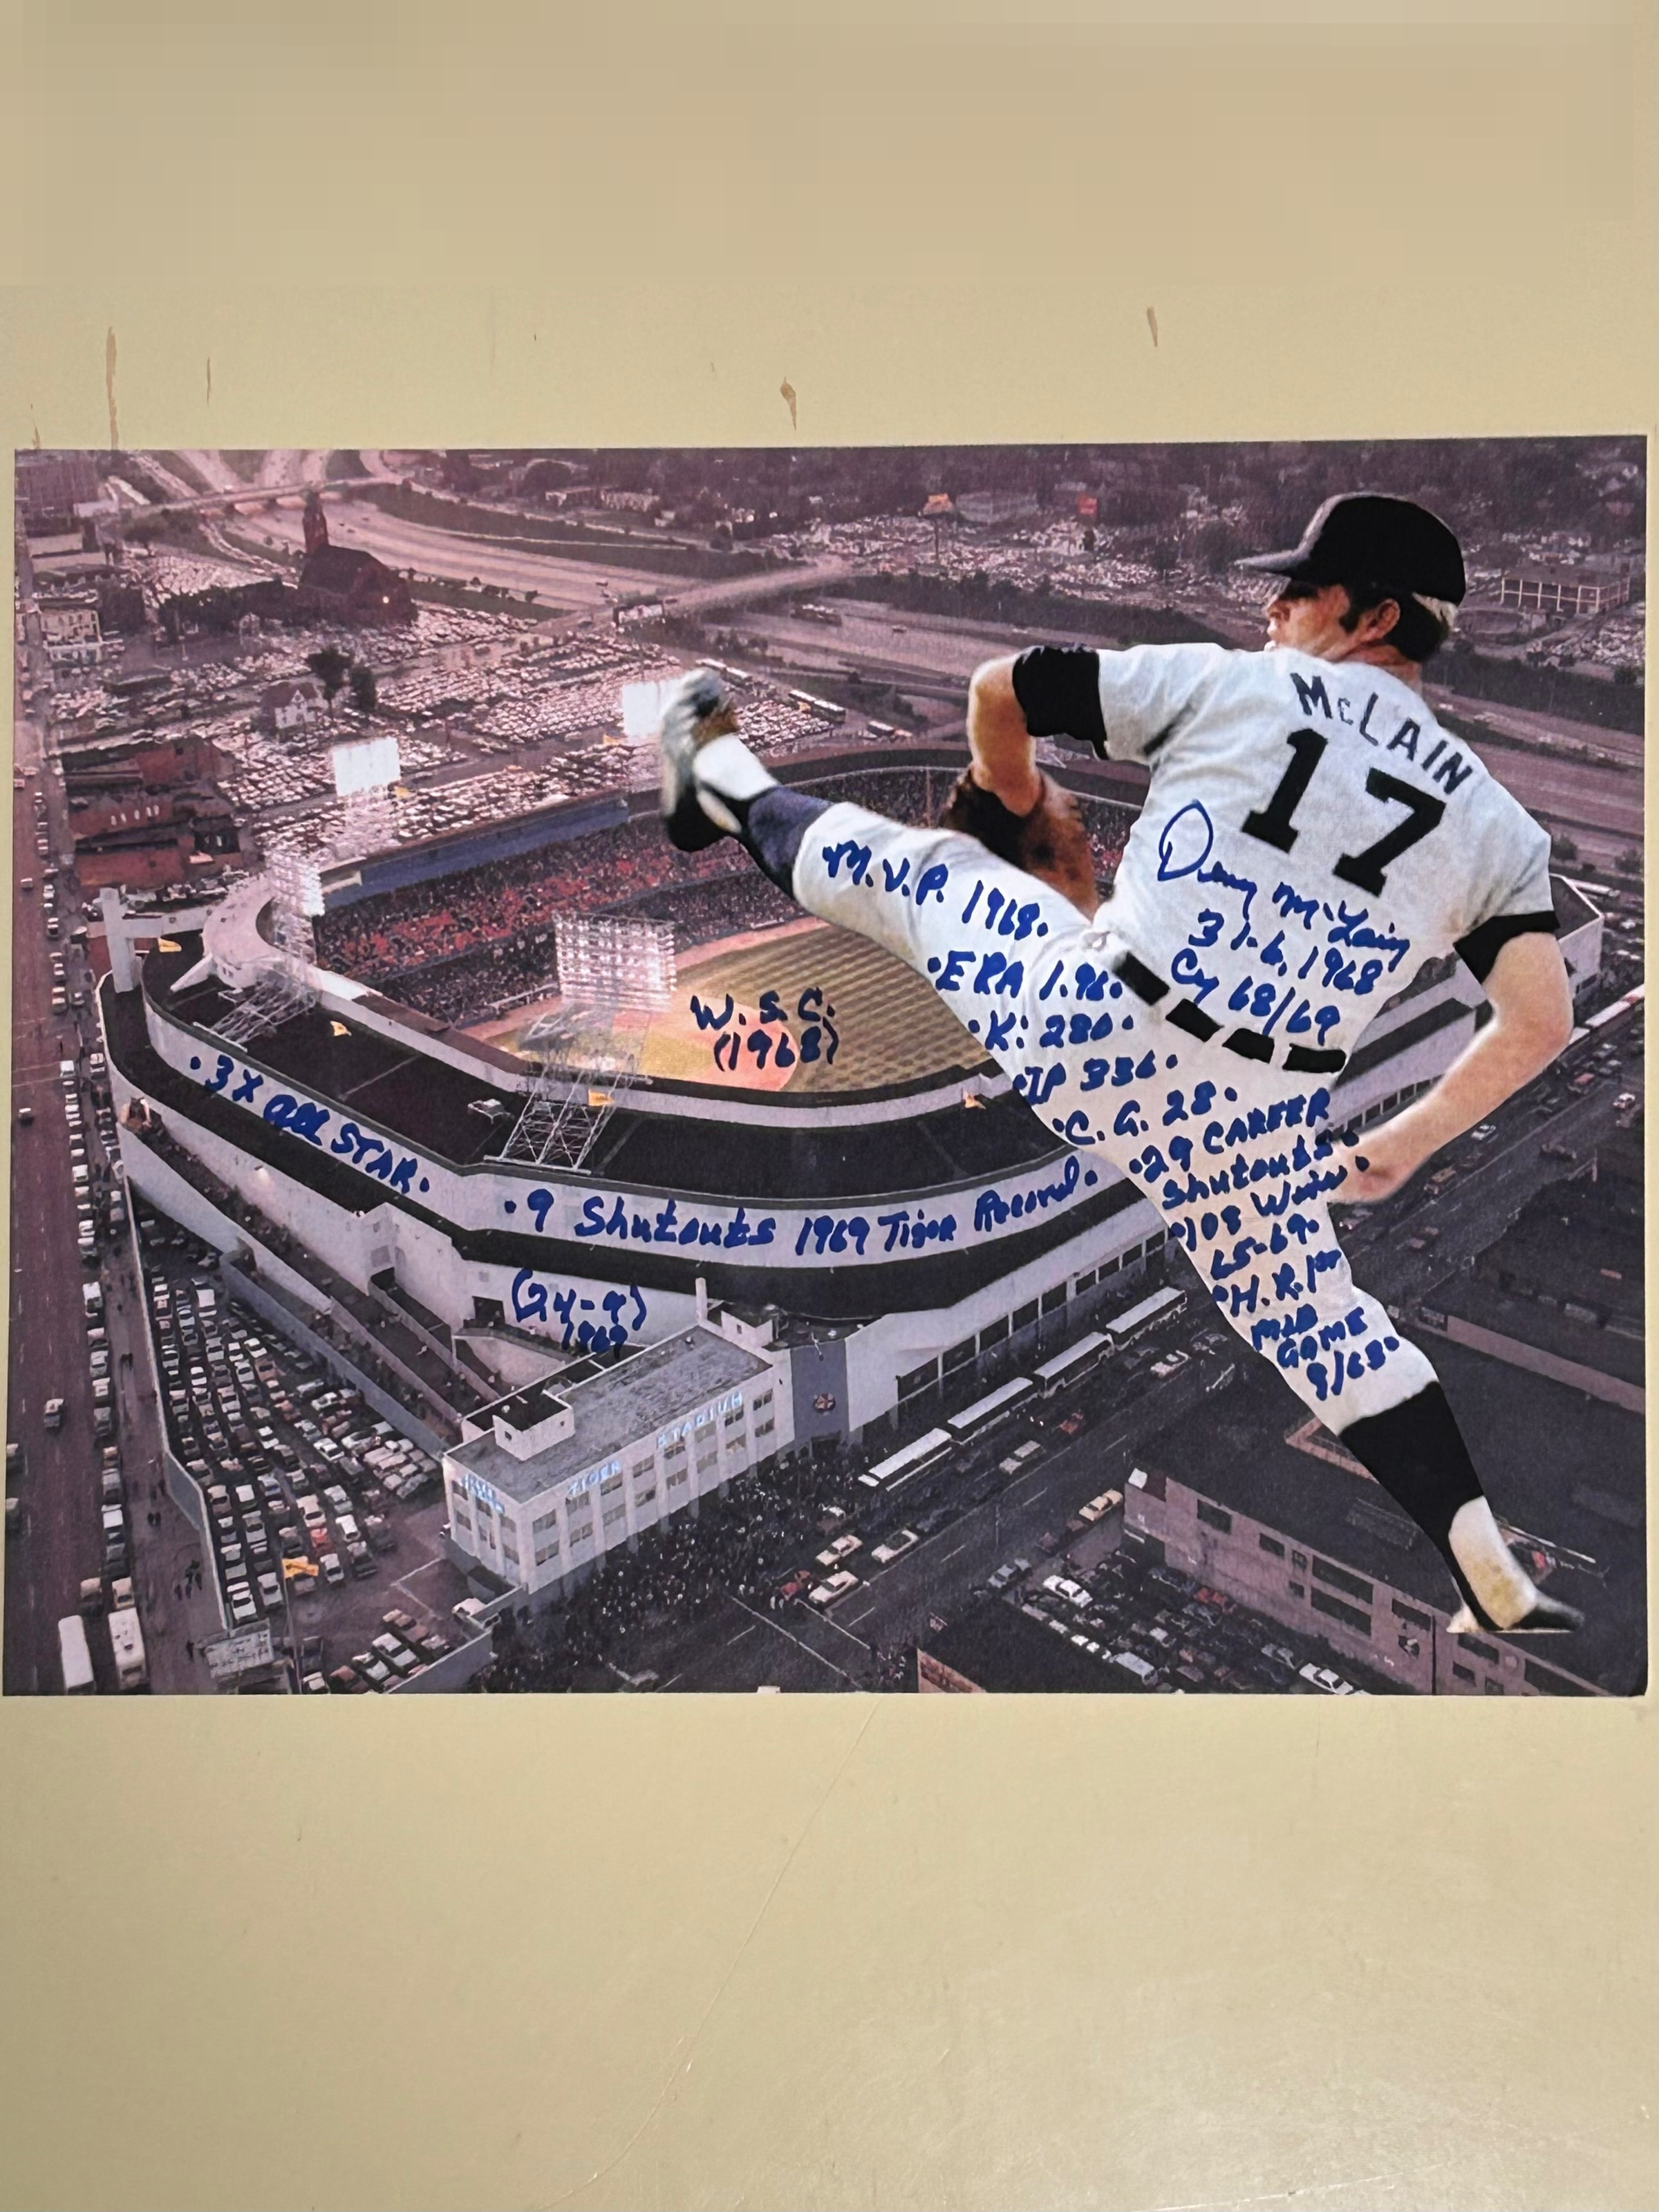 Gallery-1  I am the Real Denny Mclain